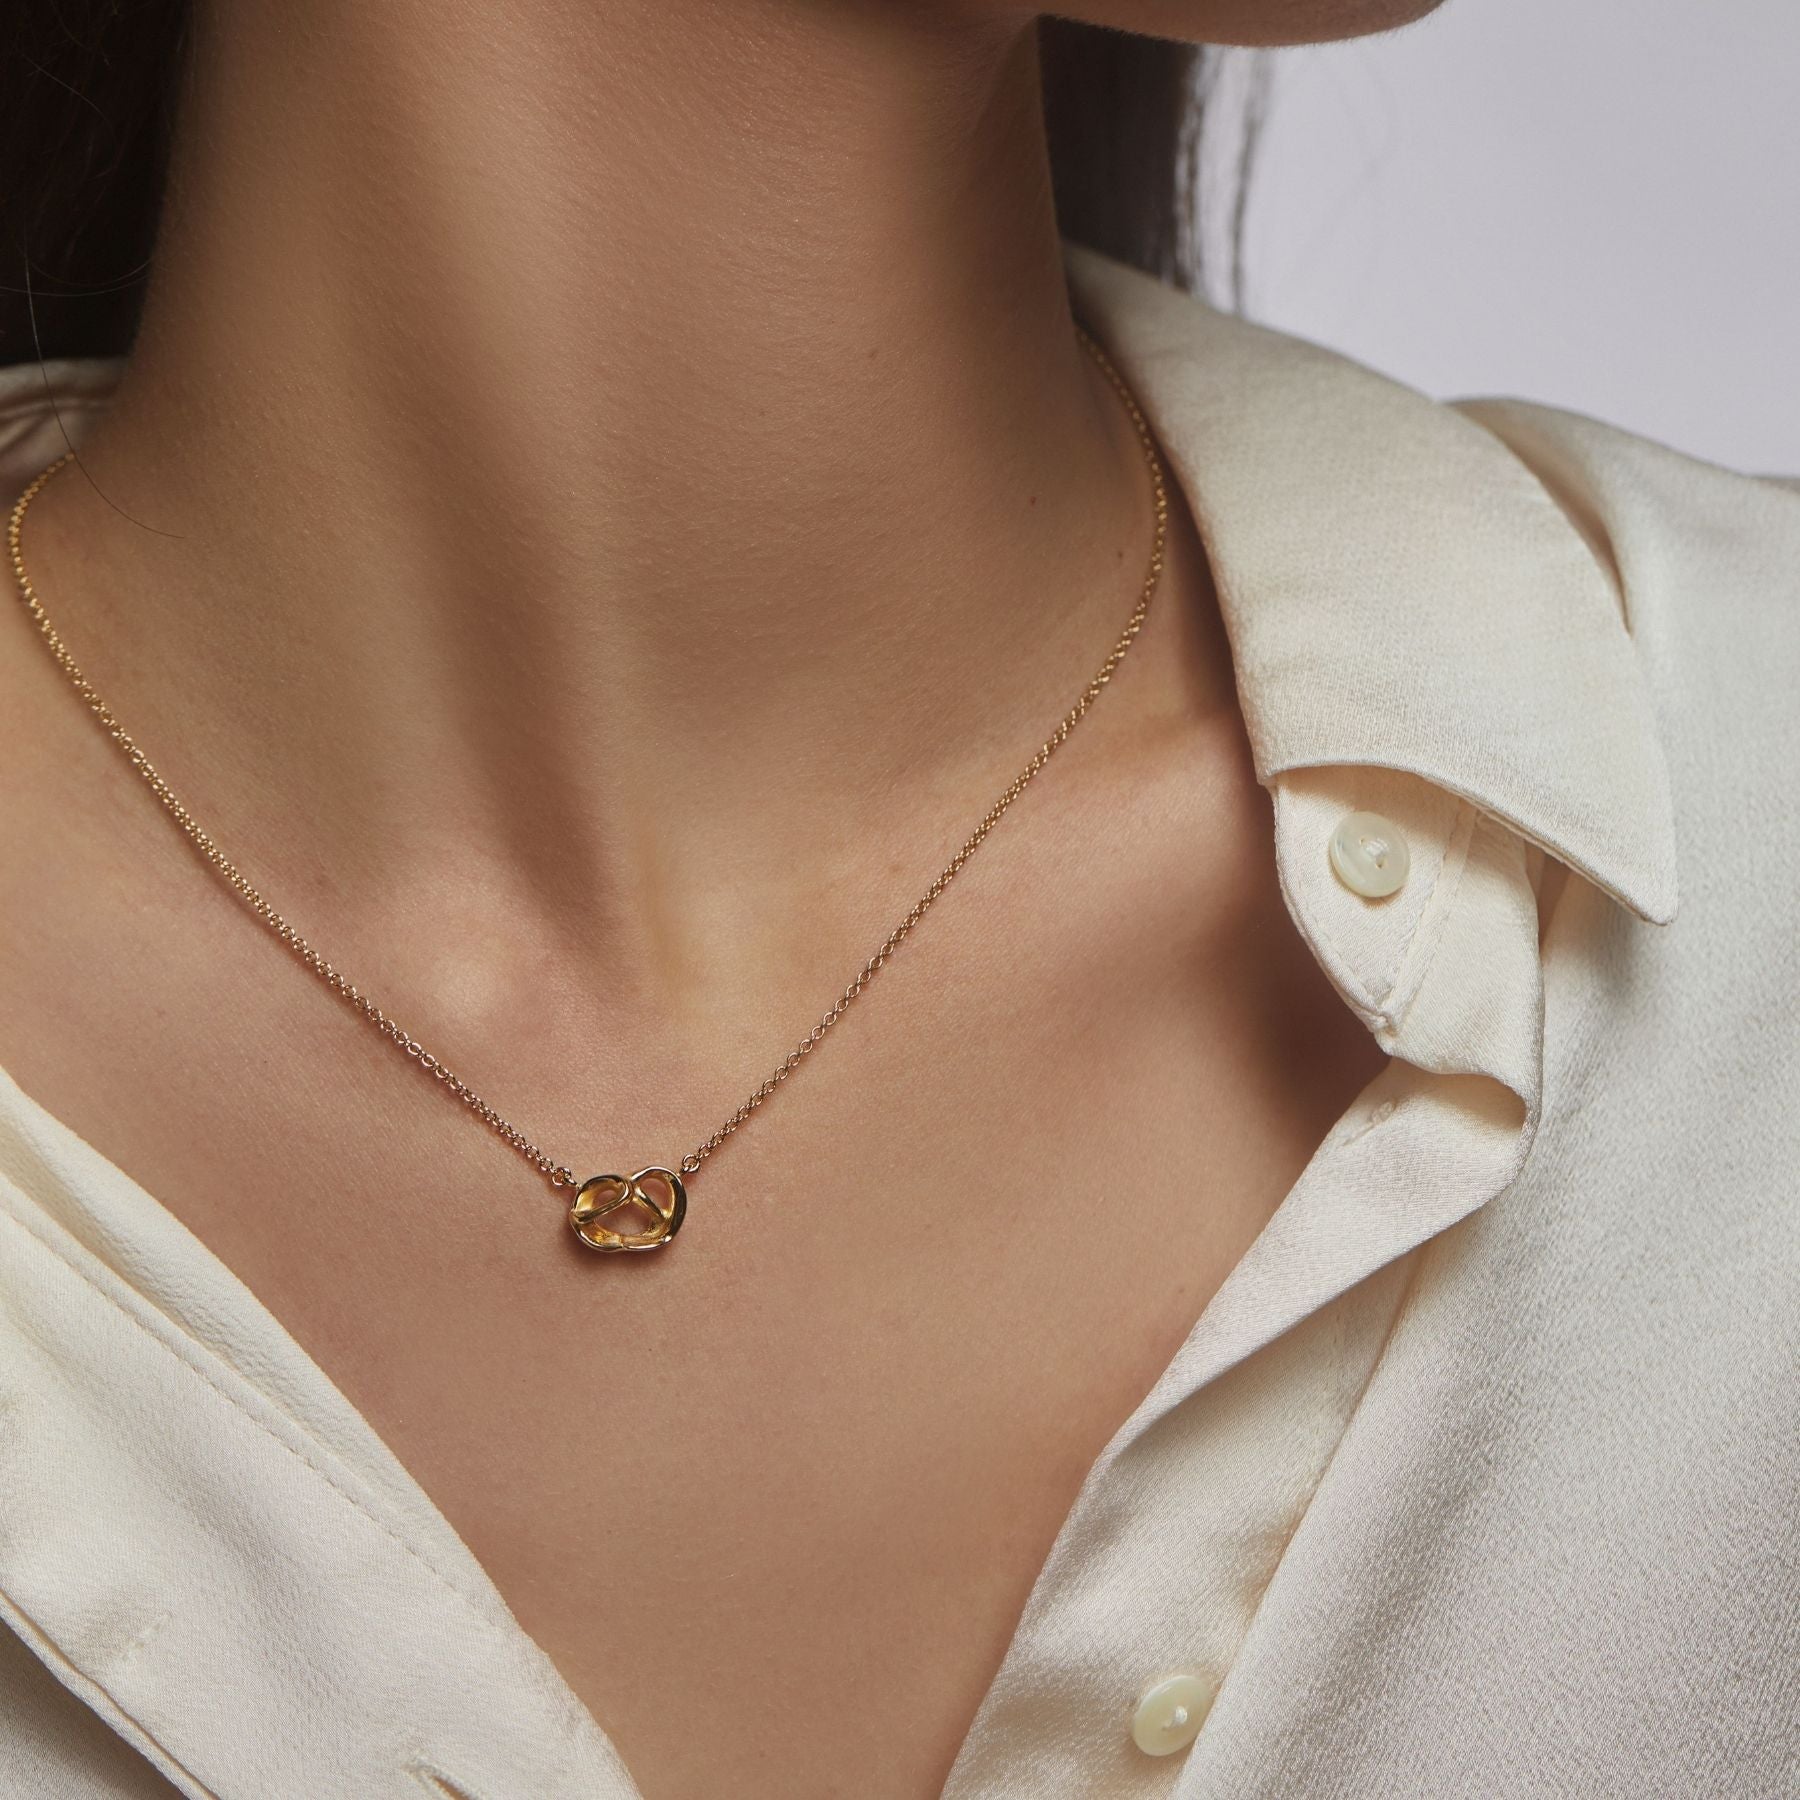 Abstract pretzel pendant necklace on a delicate cable chain finished with an Anjou pear charm in 18k gold vermeil.